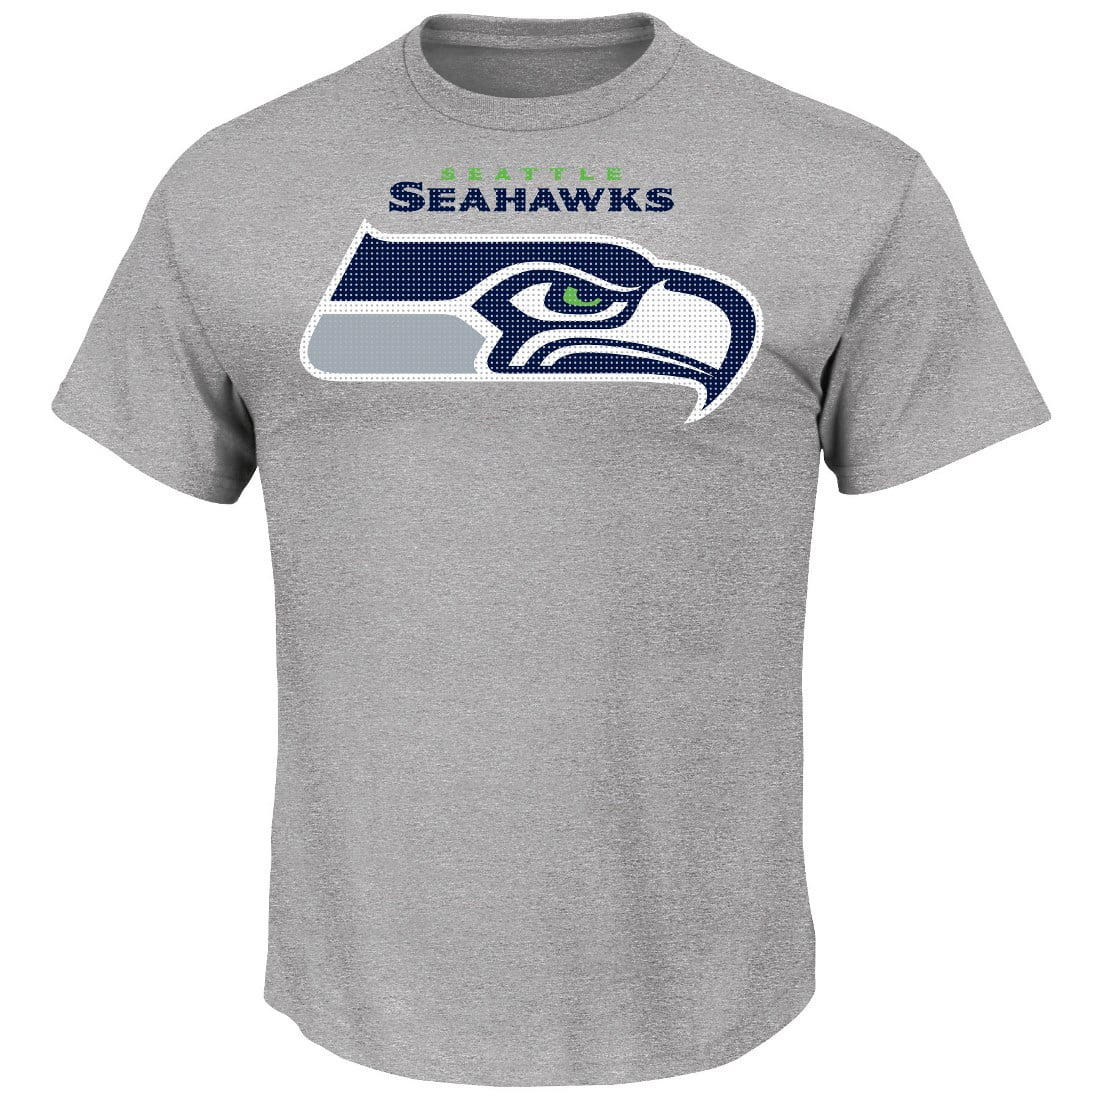 Seattle Seahawks Majestic NFL "Critical Victory 2" Men's T Shirt   Gray